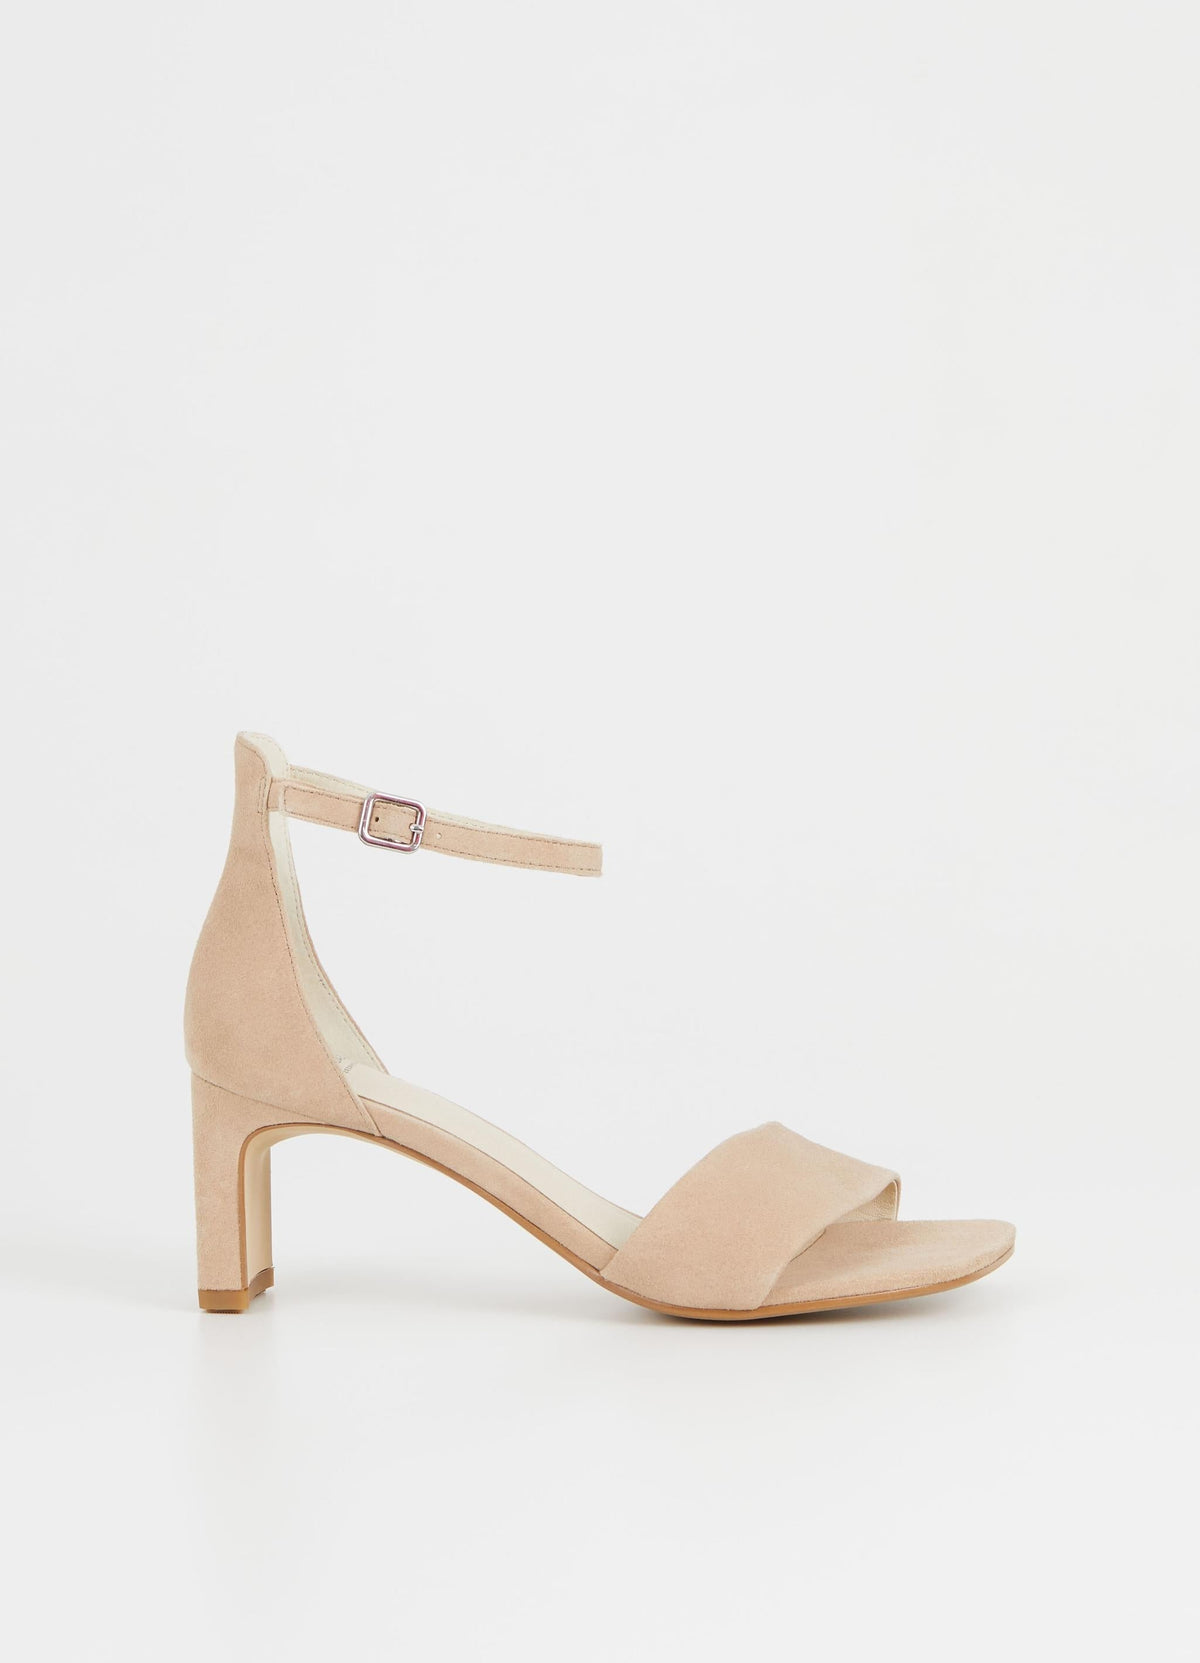 Light beige low heels with single suede strap and ankle strap